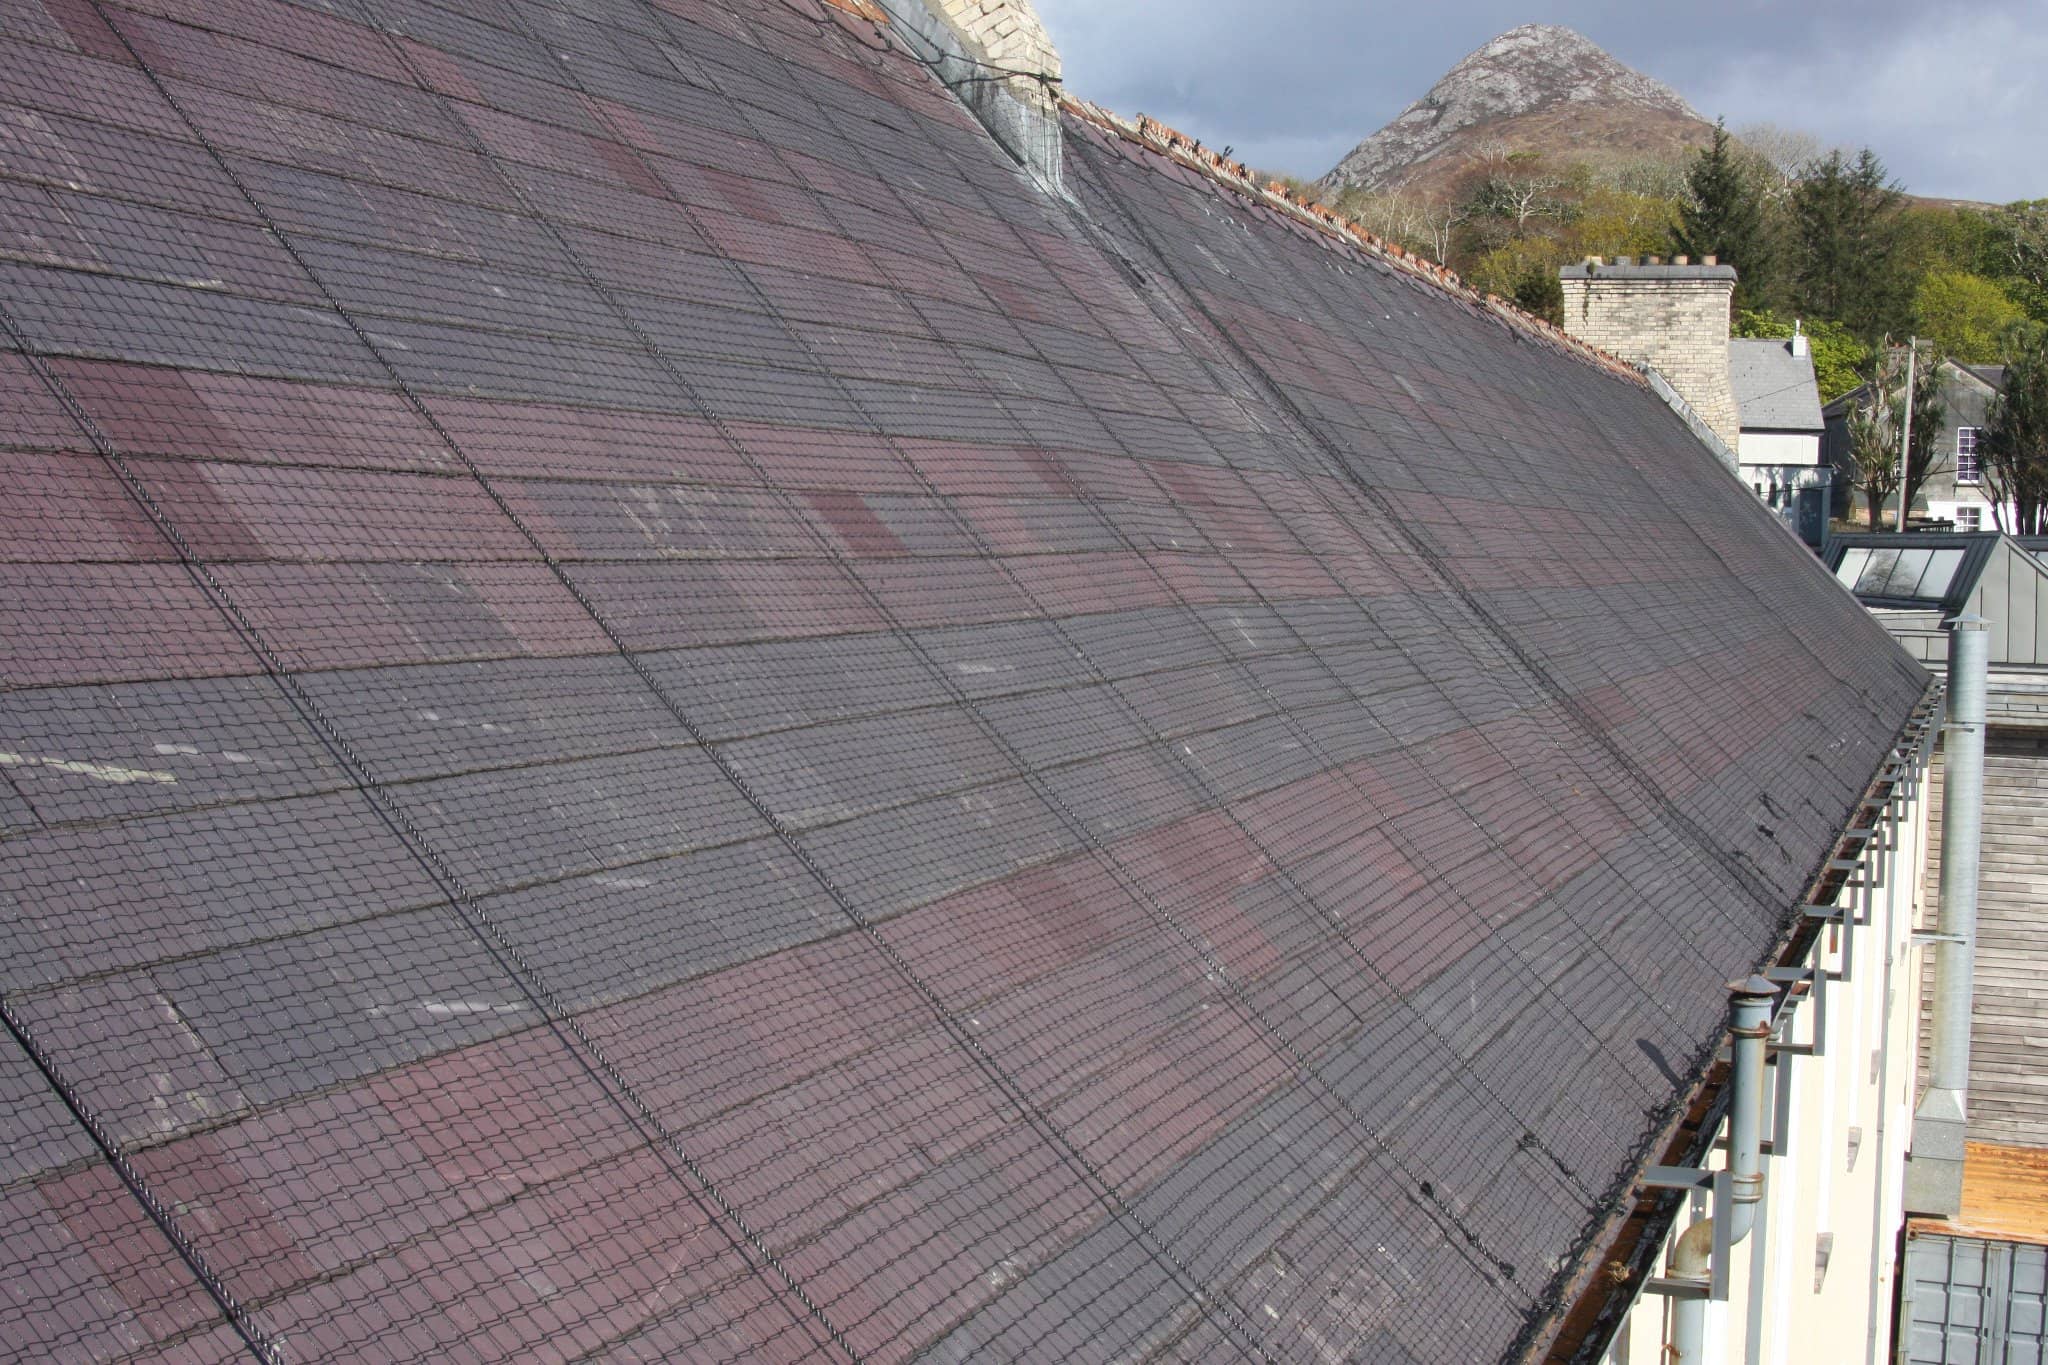 industrial net protecting roof slates